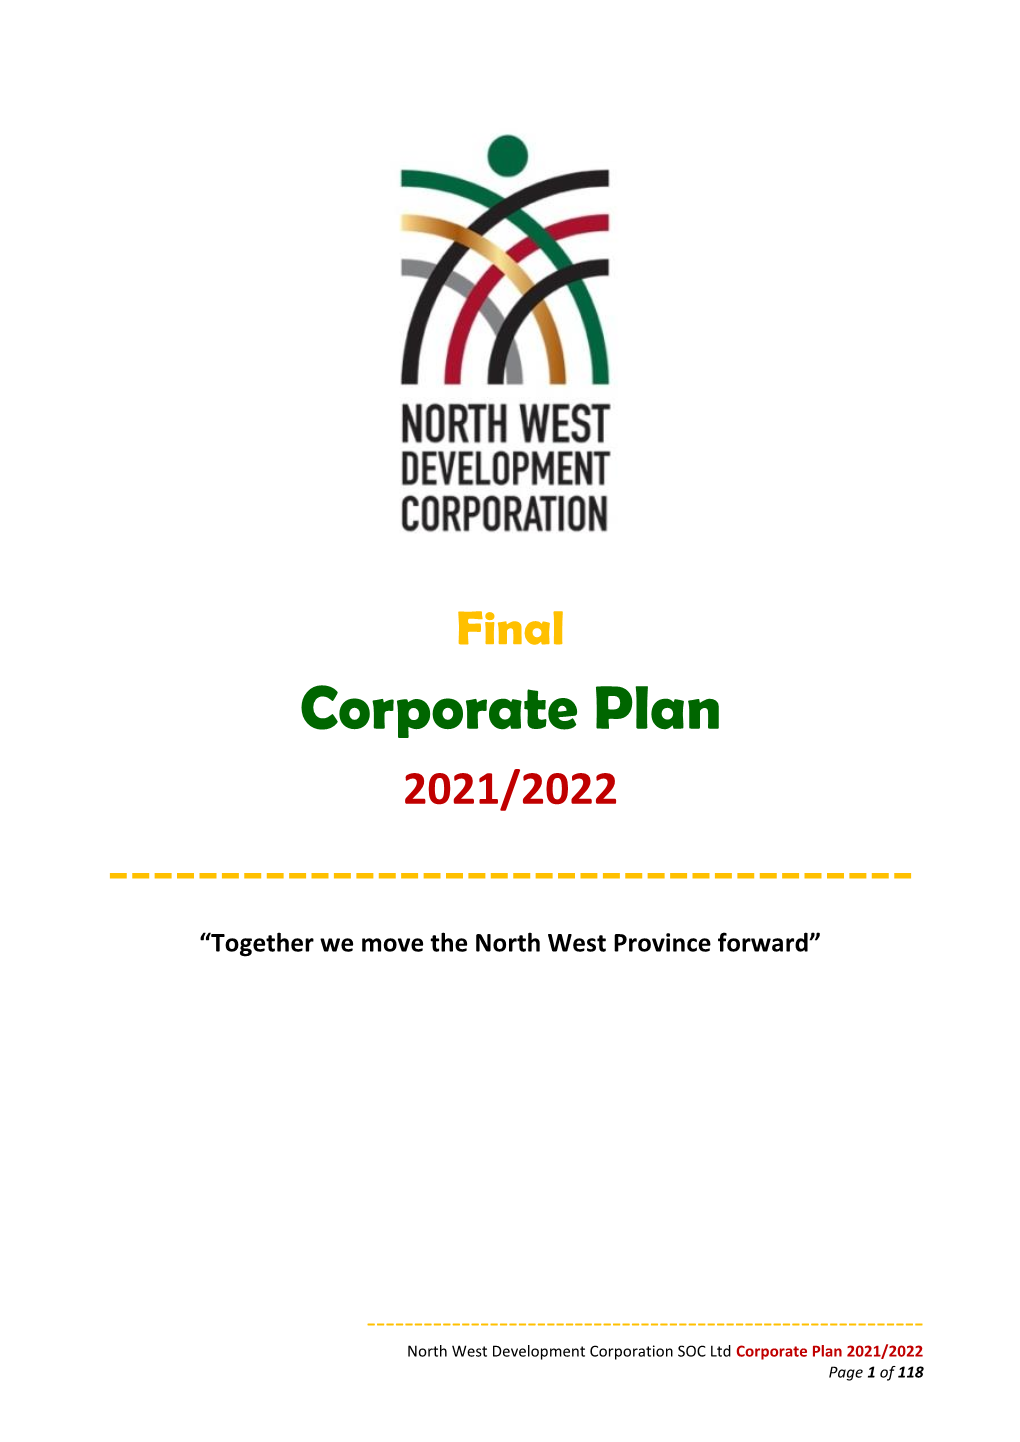 NWDC Corporate Plan 2021.22, 29 March 2021